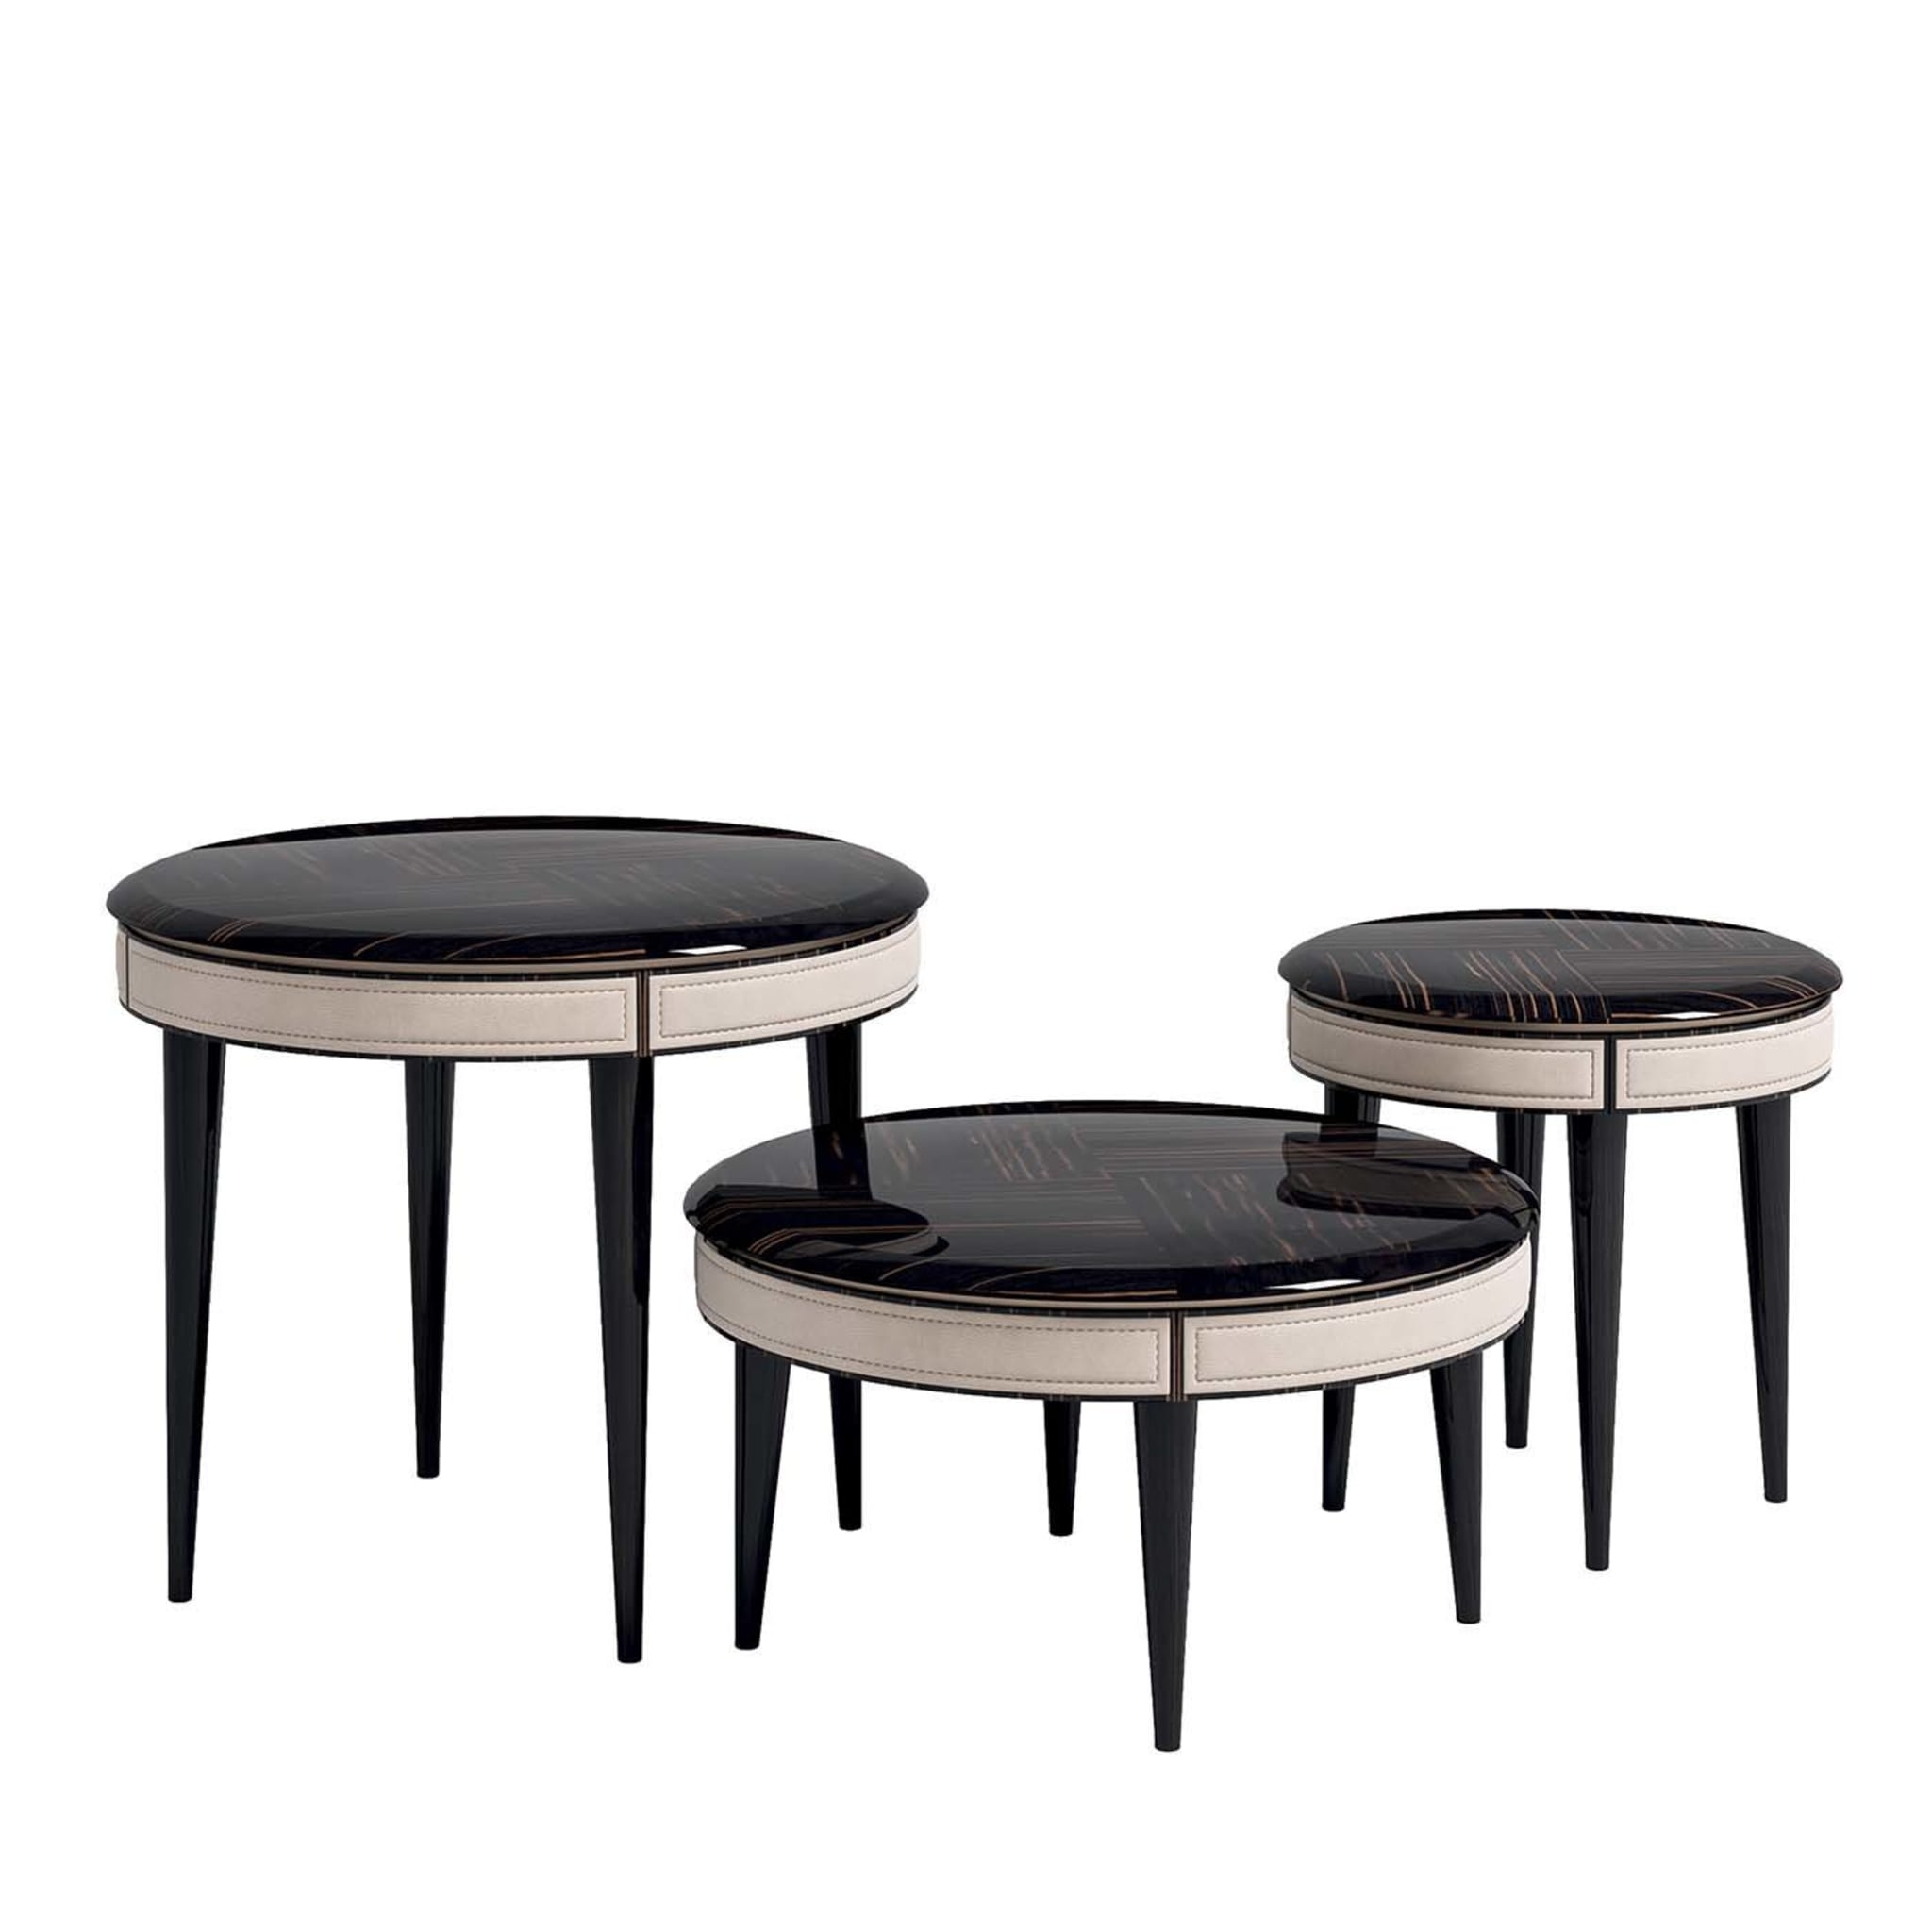 Set of 3 Nasting Tables in Ebony - Main view